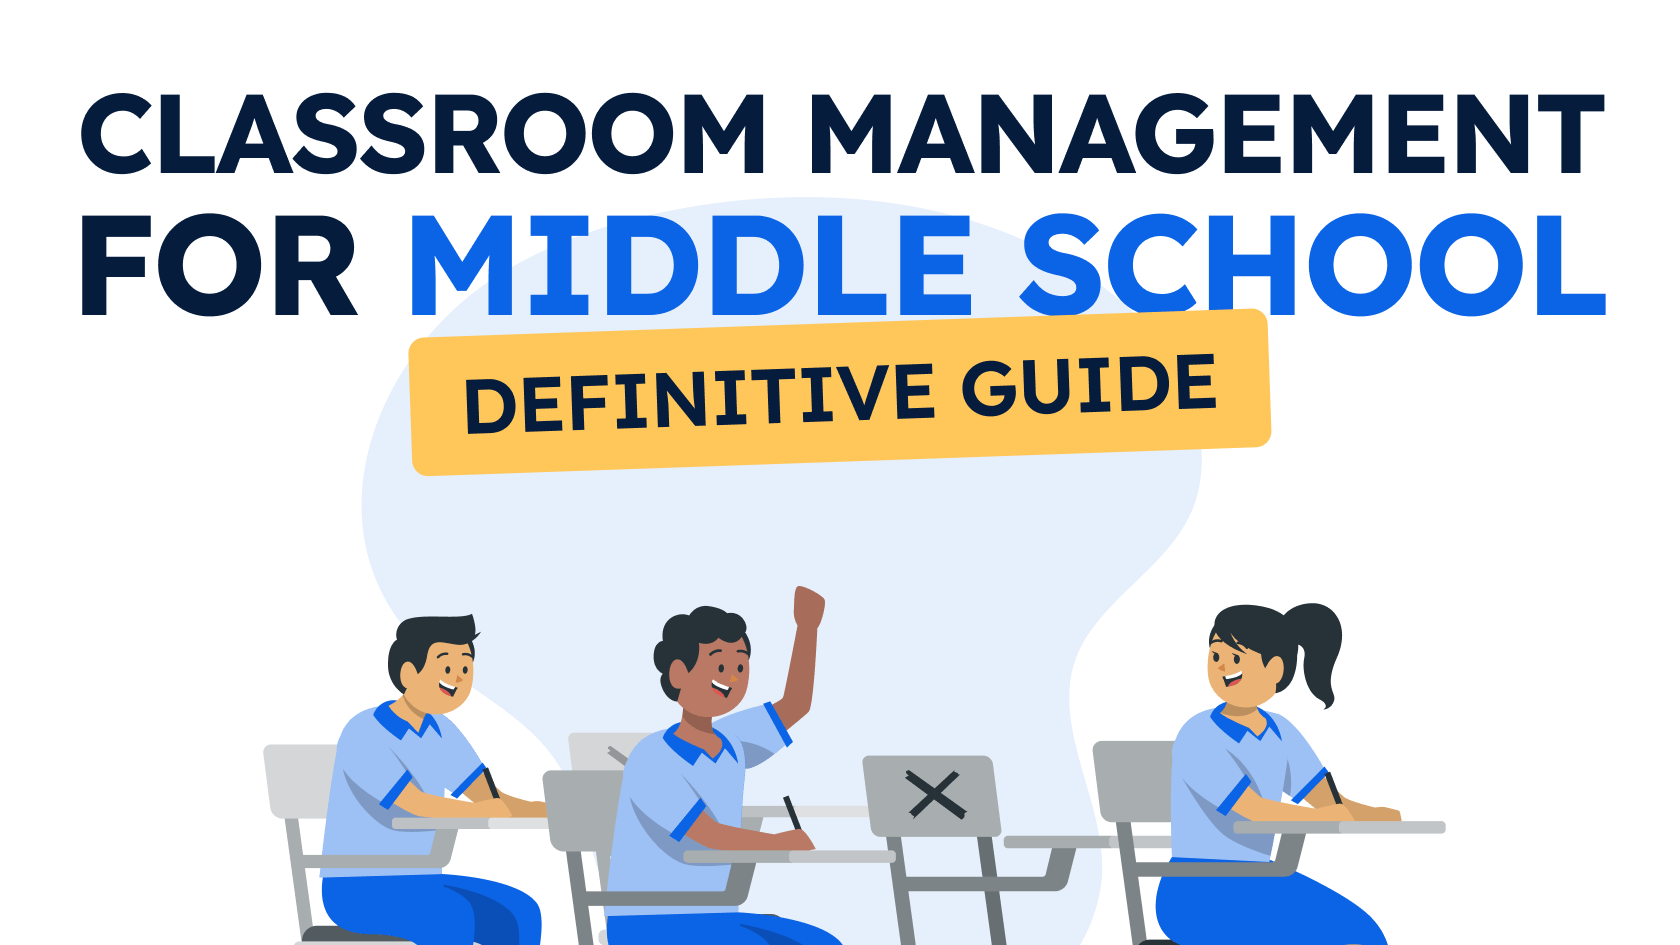 Classroom Management For Middle School - The Definitive Guide